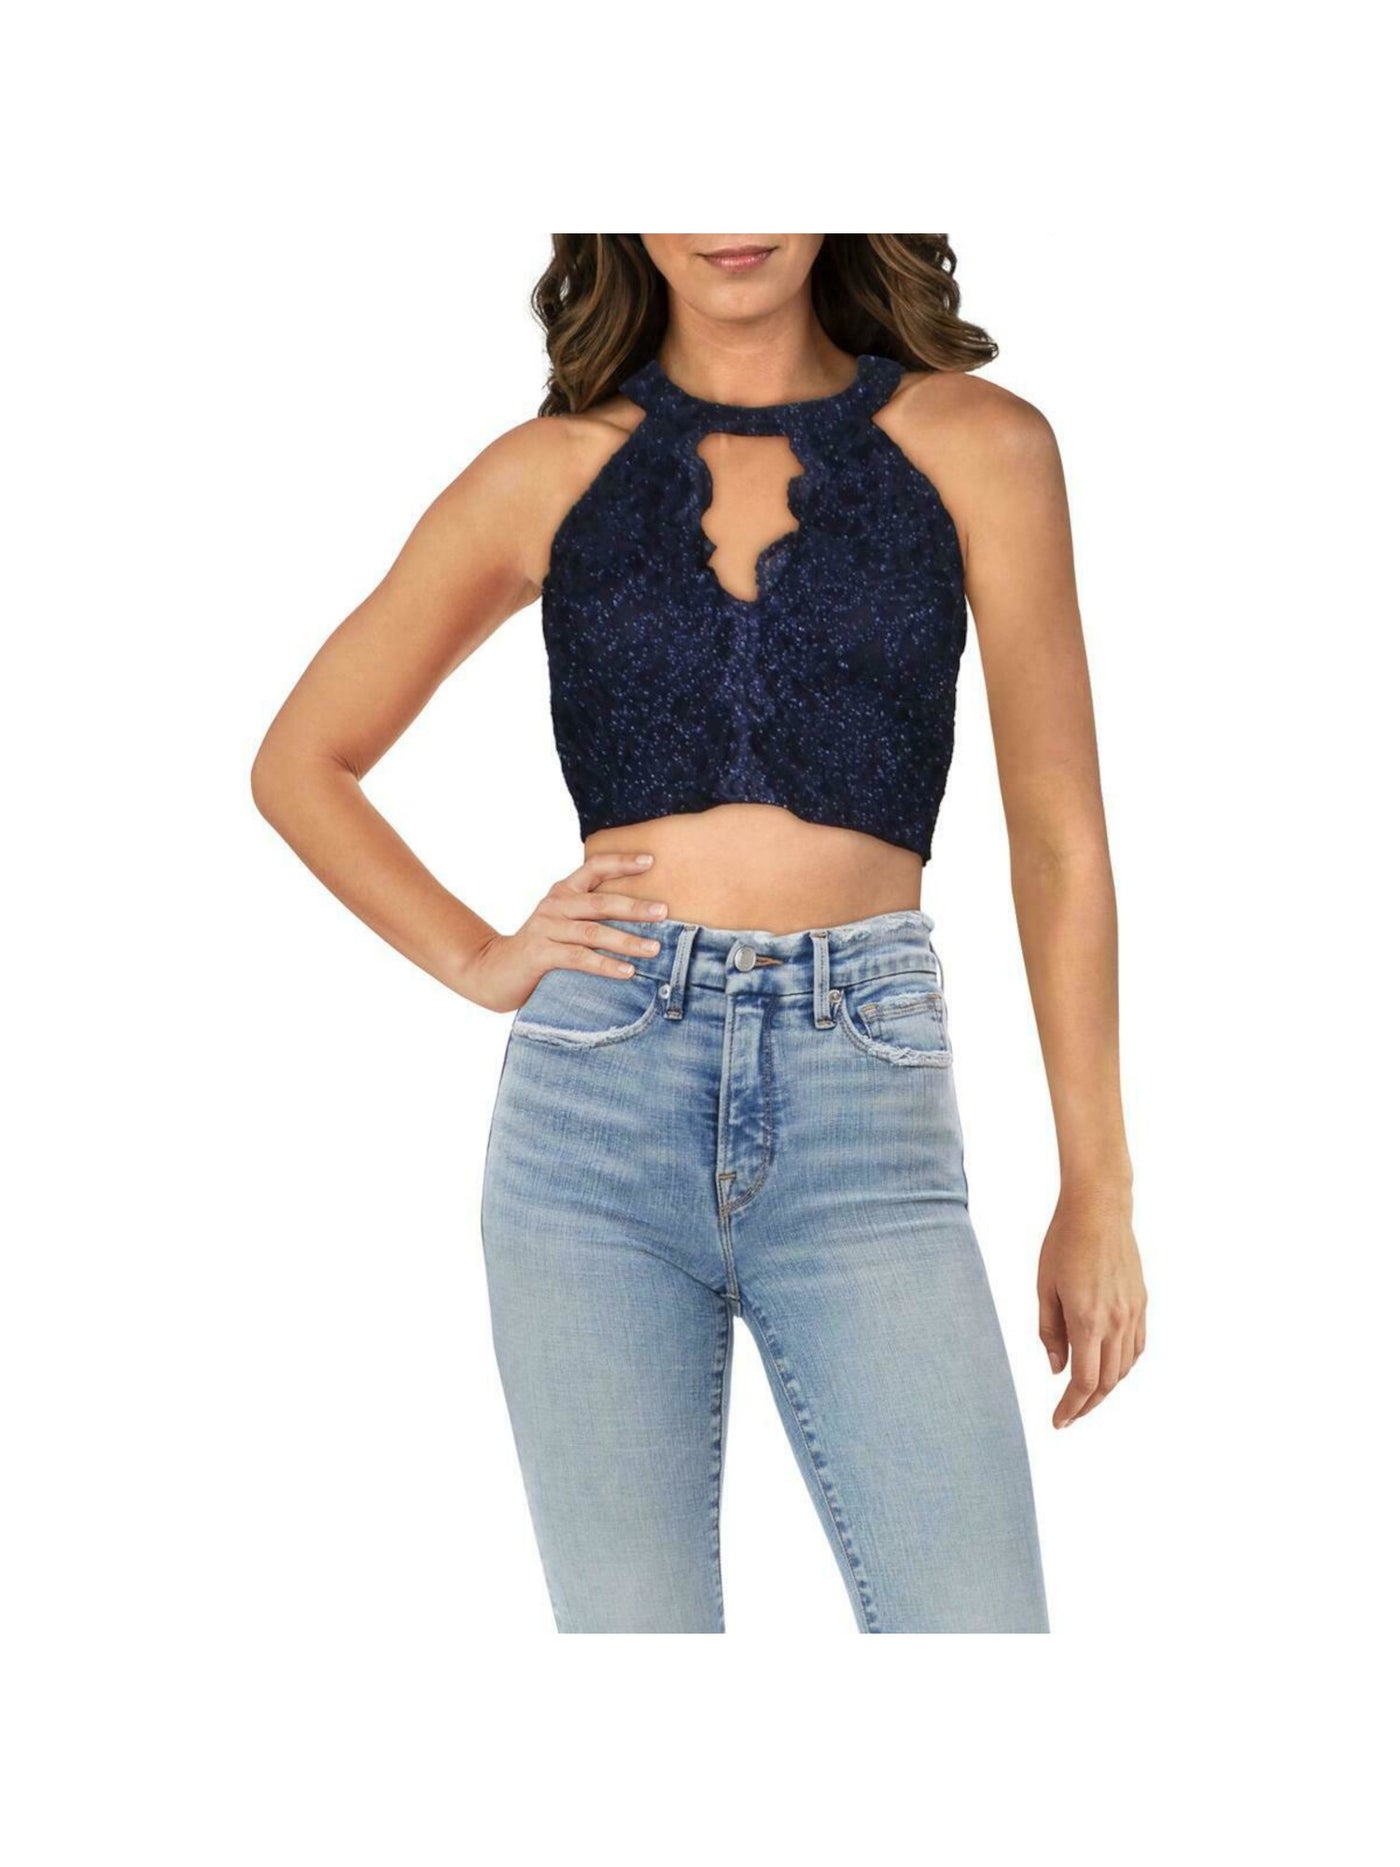 CITY STUDIO Womens Navy Stretch Zippered Cut Out At Front Neckline Floral Sleeveless Halter Party Crop Top Juniors 13